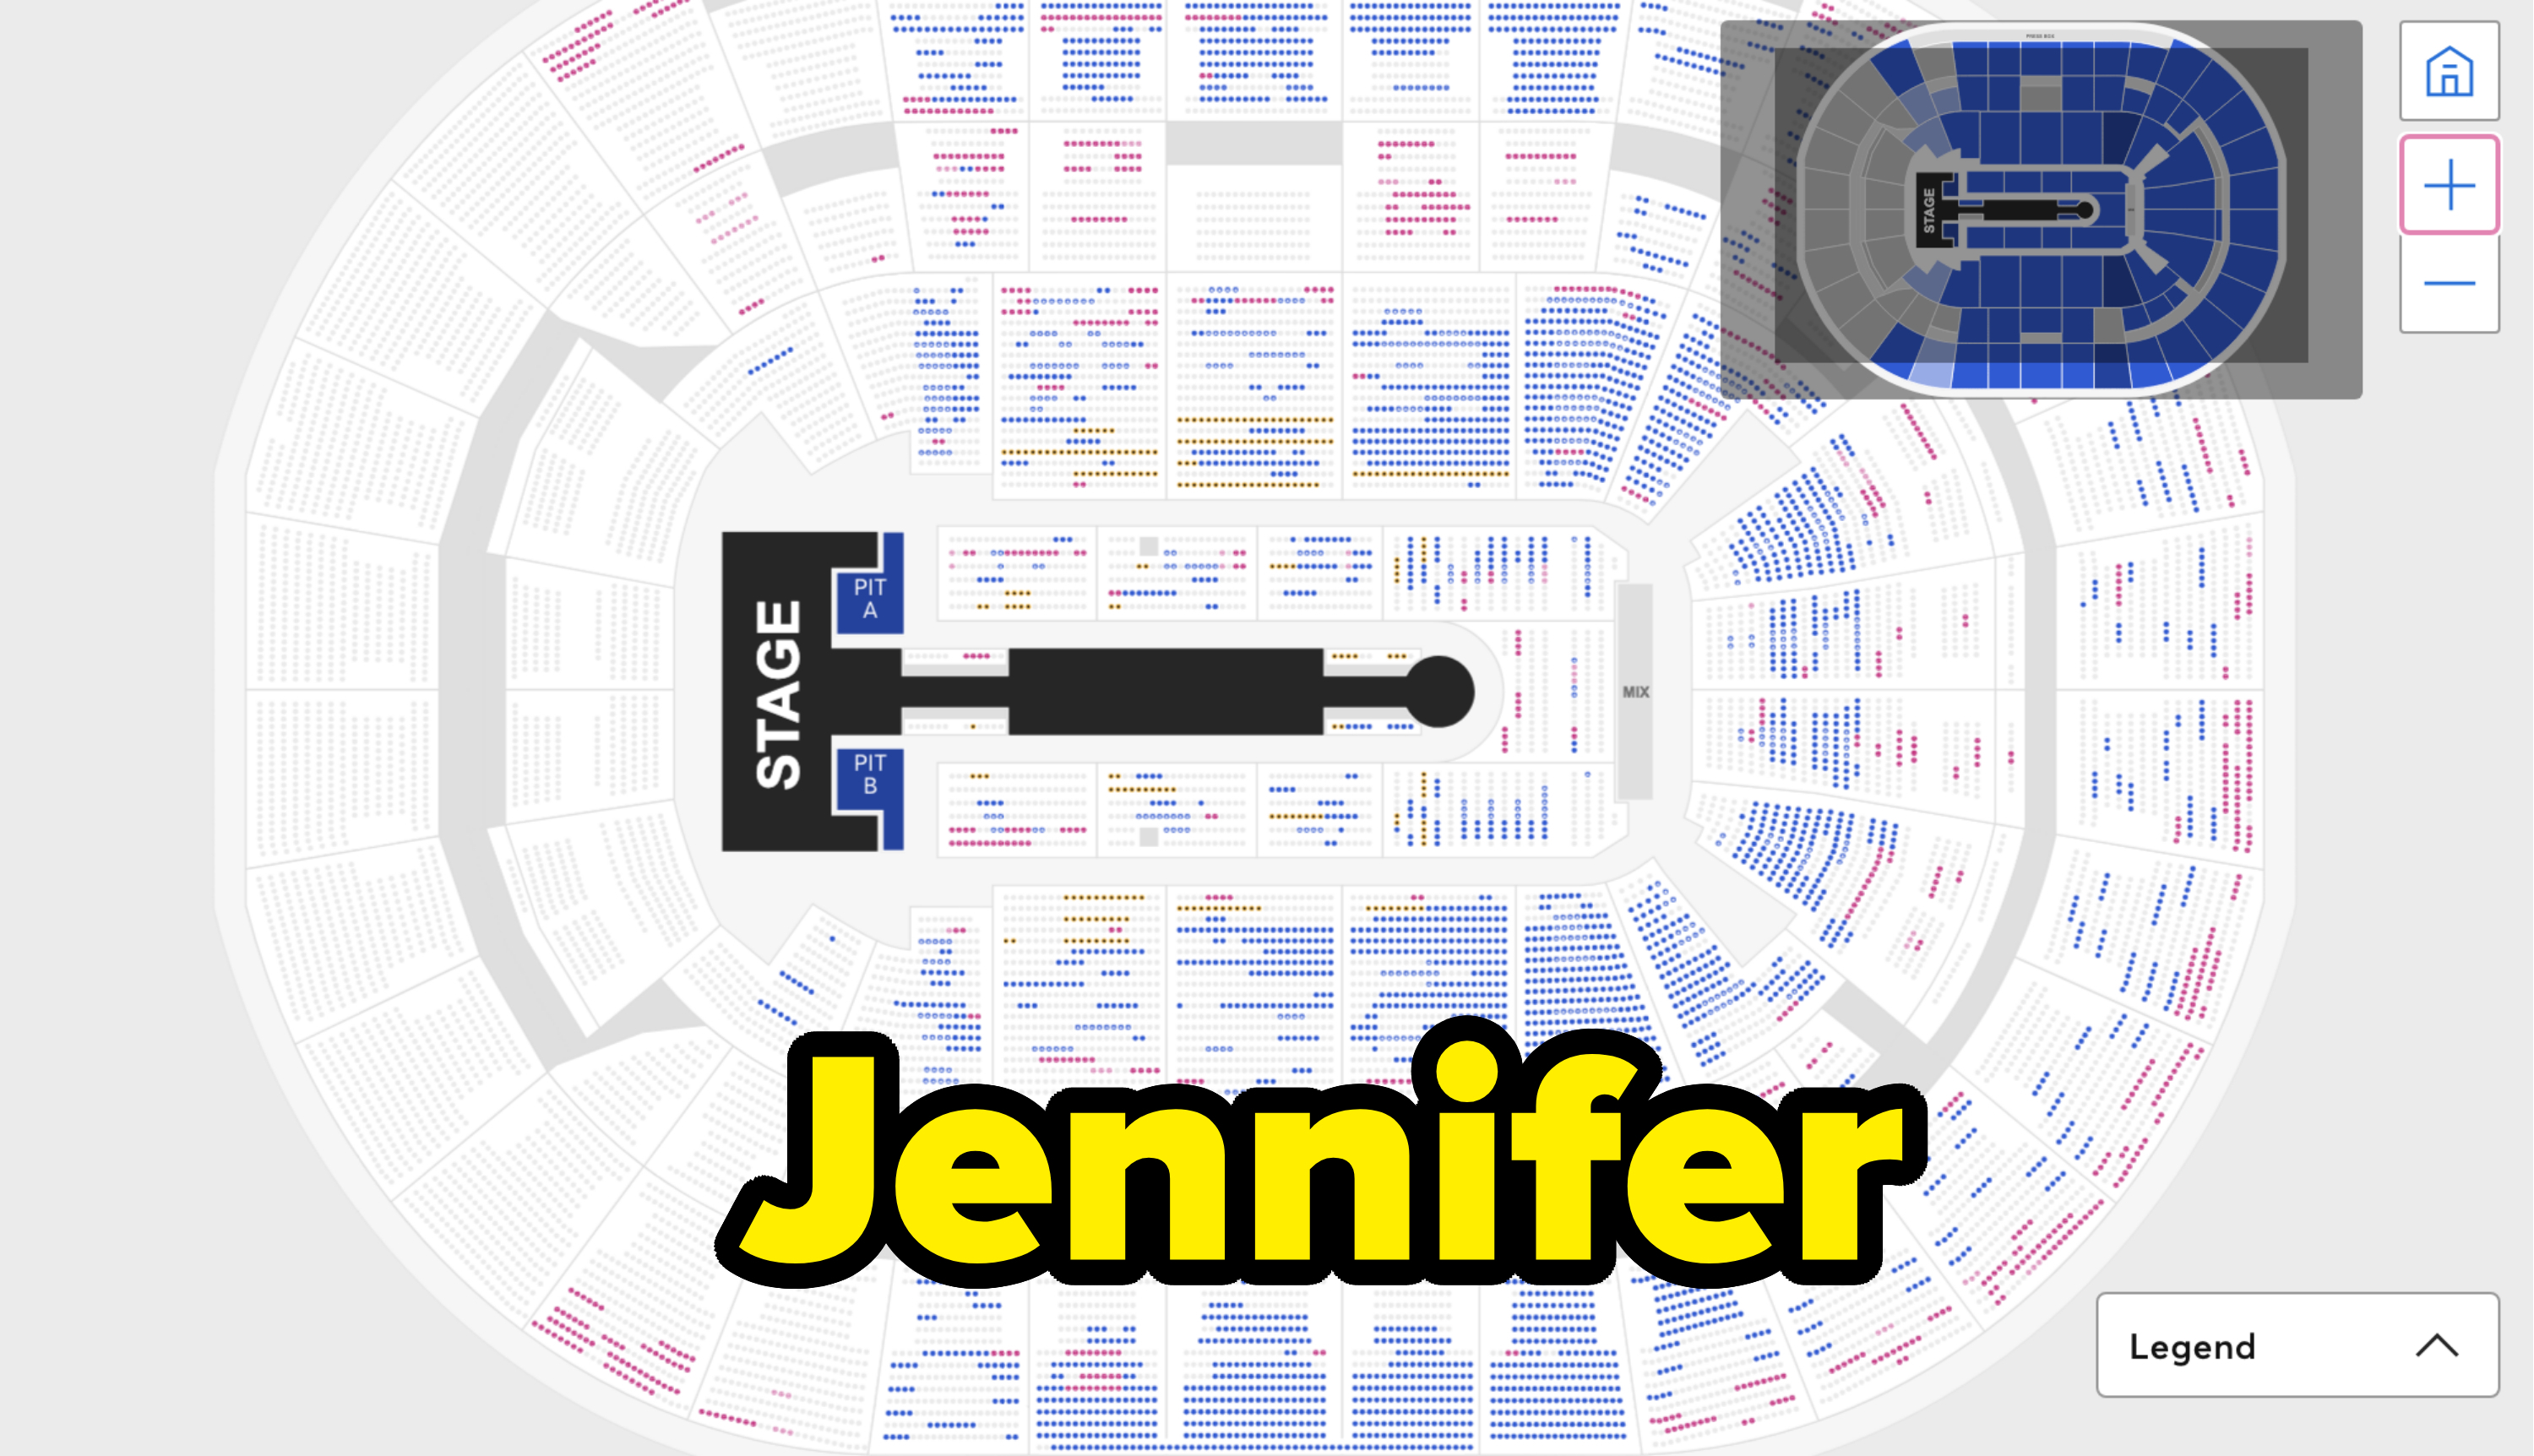 Seating chart for an event showing stage placement and labeled seat sections